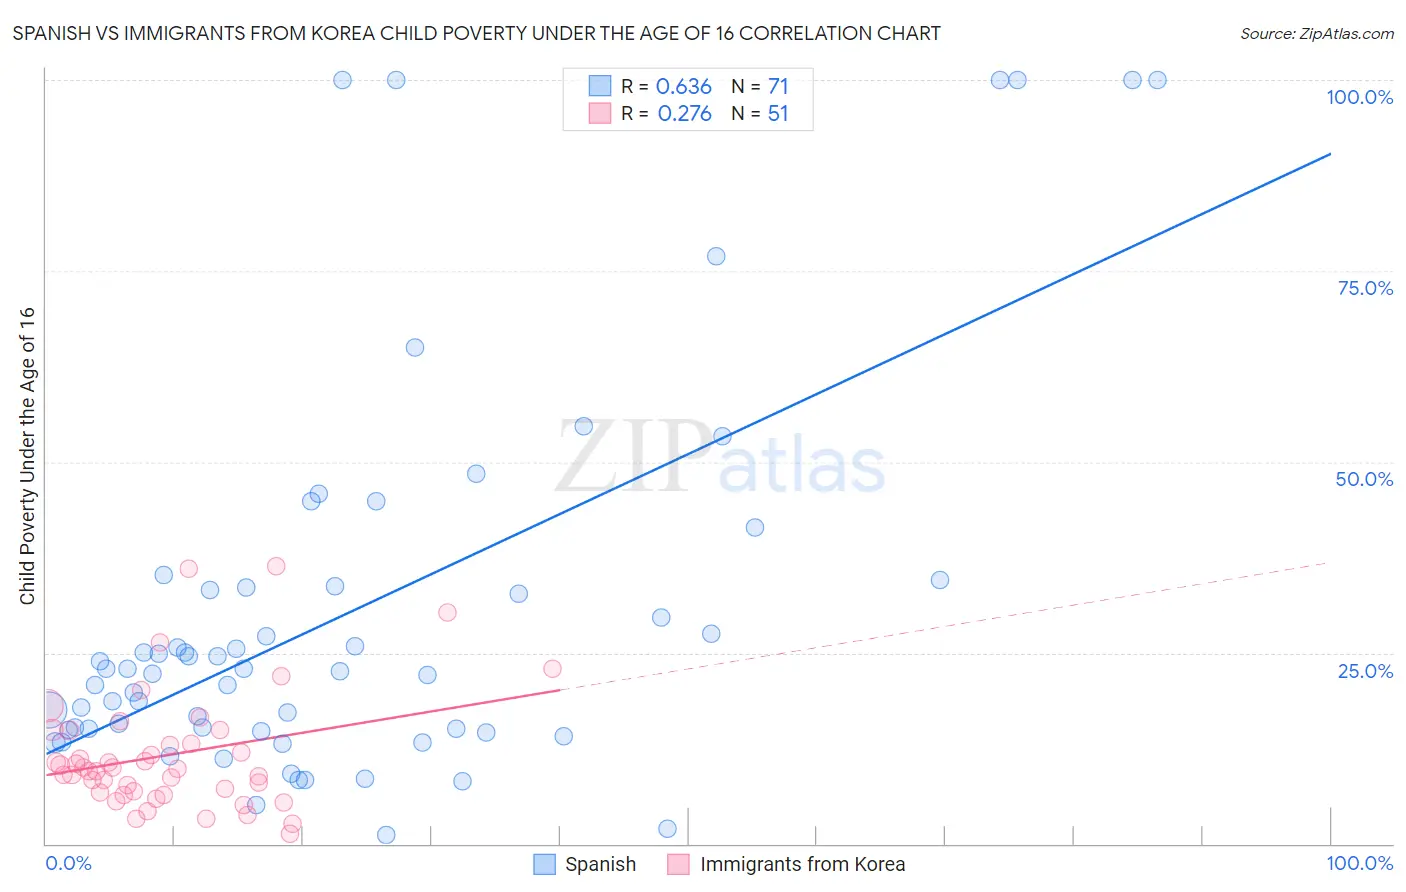 Spanish vs Immigrants from Korea Child Poverty Under the Age of 16